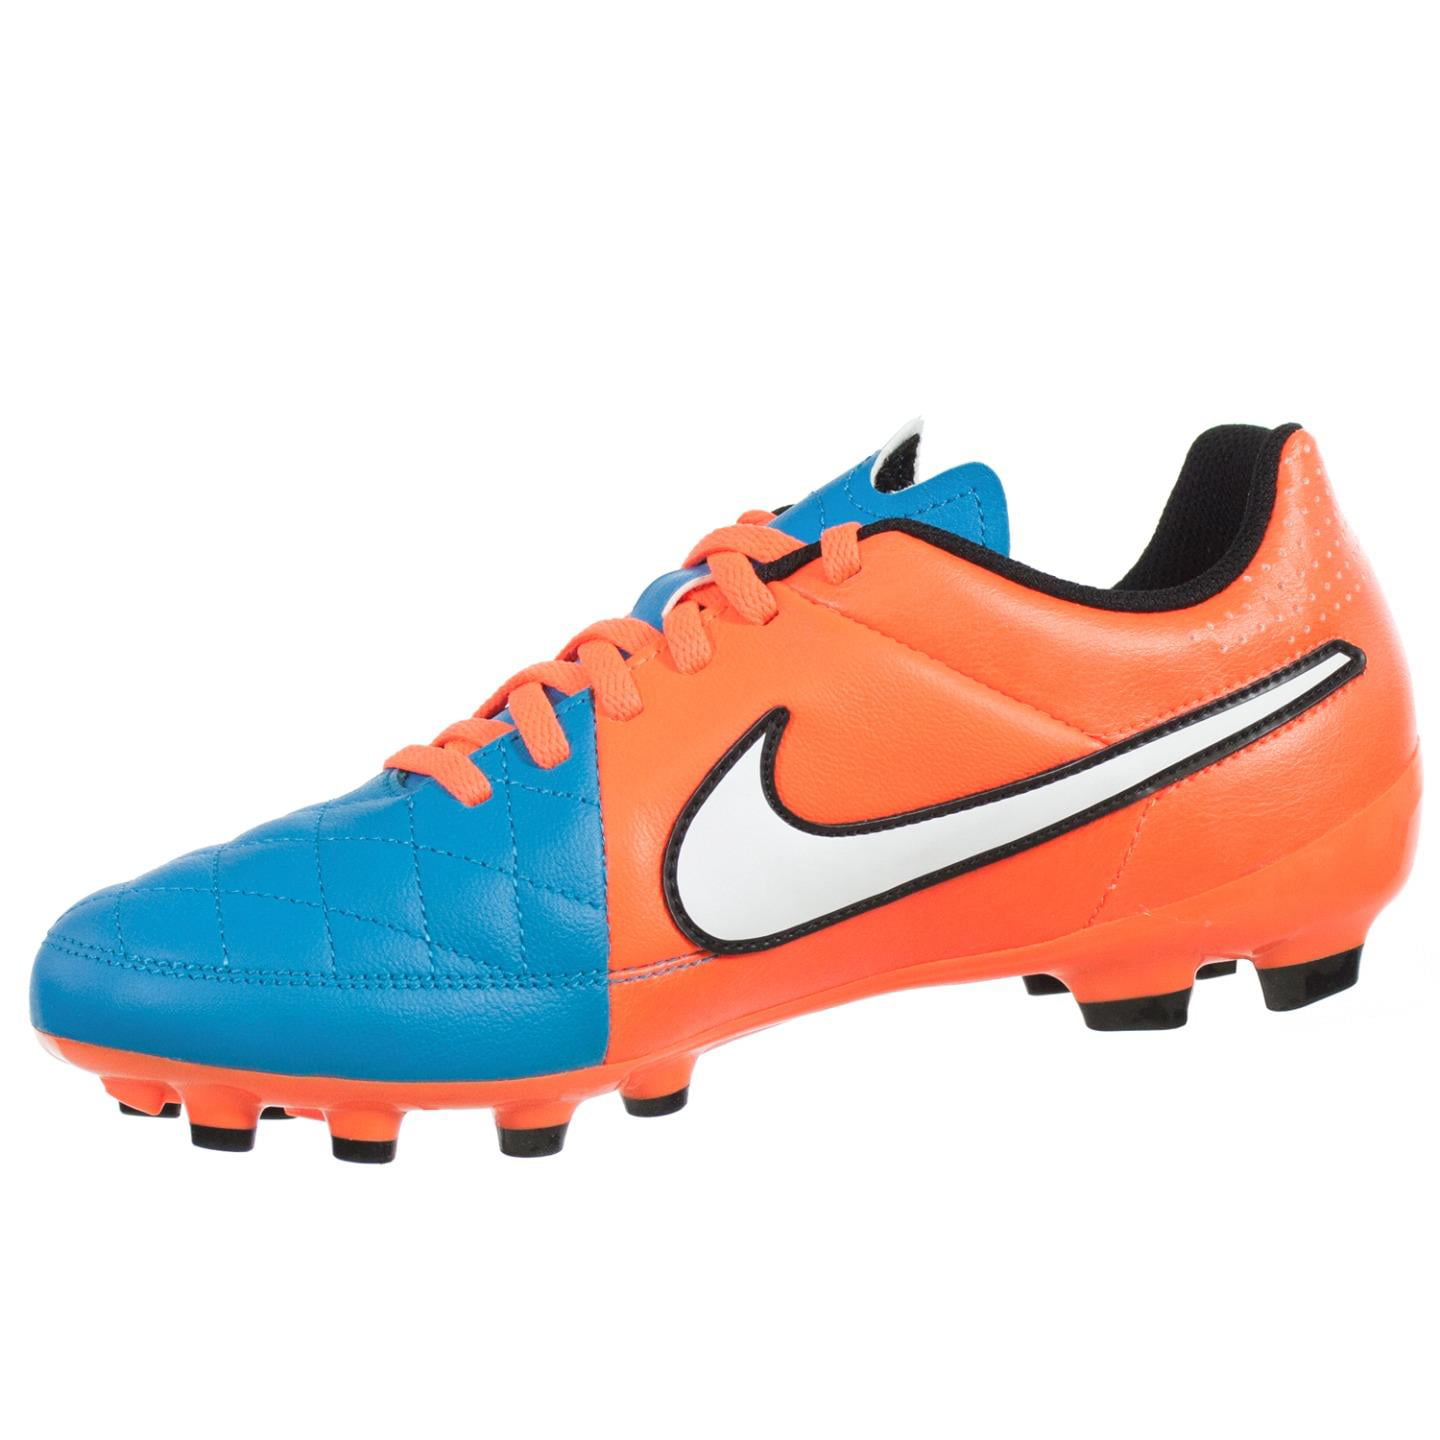 NIKE JR LEATHER FG Youth Soccer Cleat Turquoise White Crimson 5Y Walmart.com